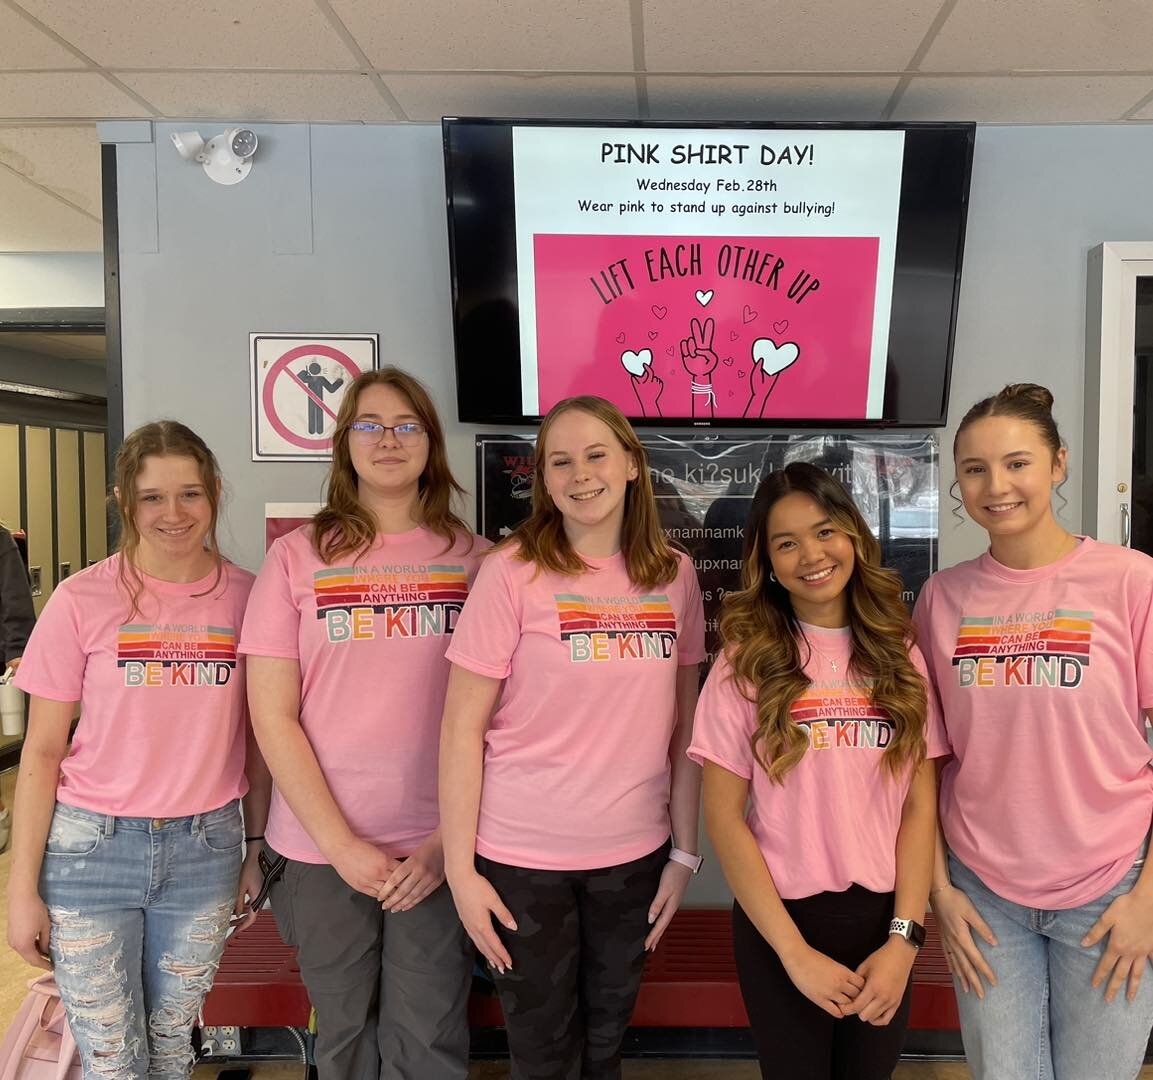 With one in five students affected by bullying, the annual pink shirt day is an opportunity to raise awareness and spread messages of kindness and compassion. Be kind all day, everyday to everyone.
#cranbrookyouthambassadors #weloveourcommunity #cran